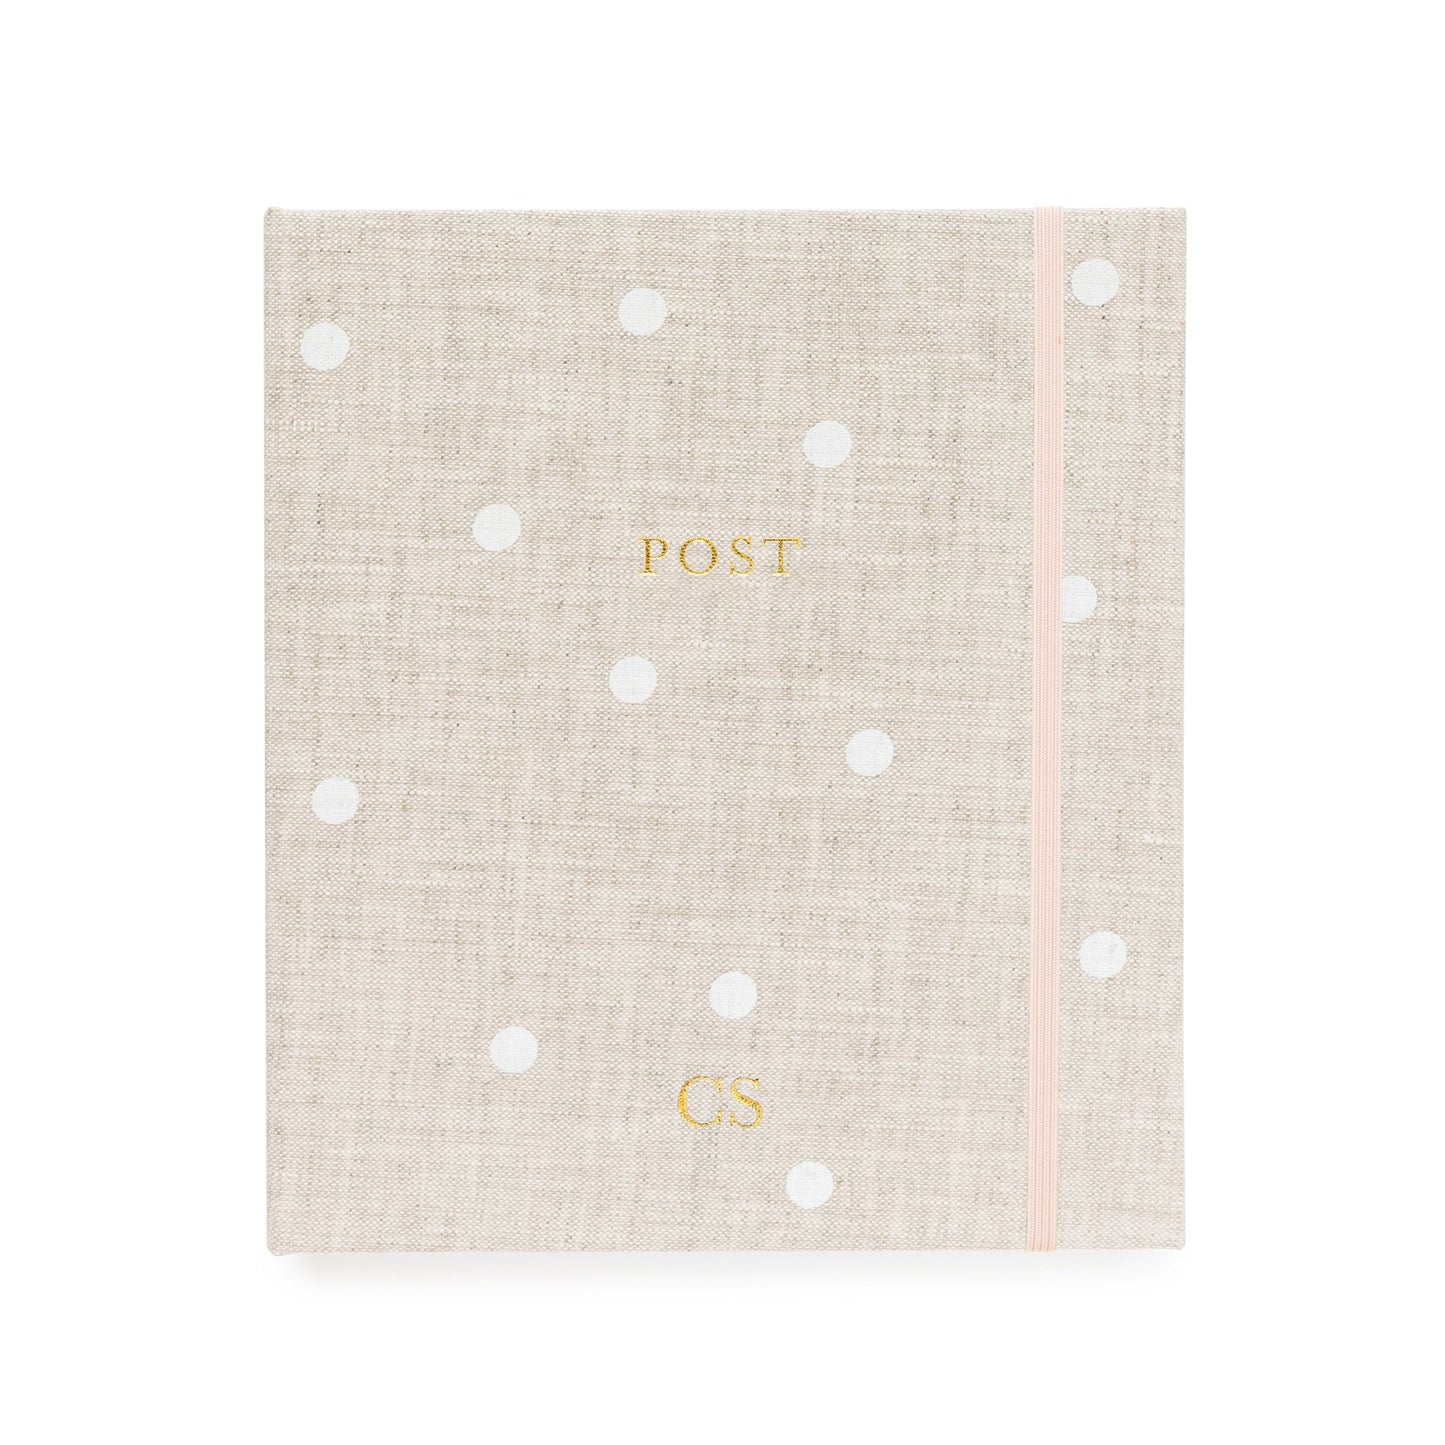 Address book with gold foil monogram on the cover